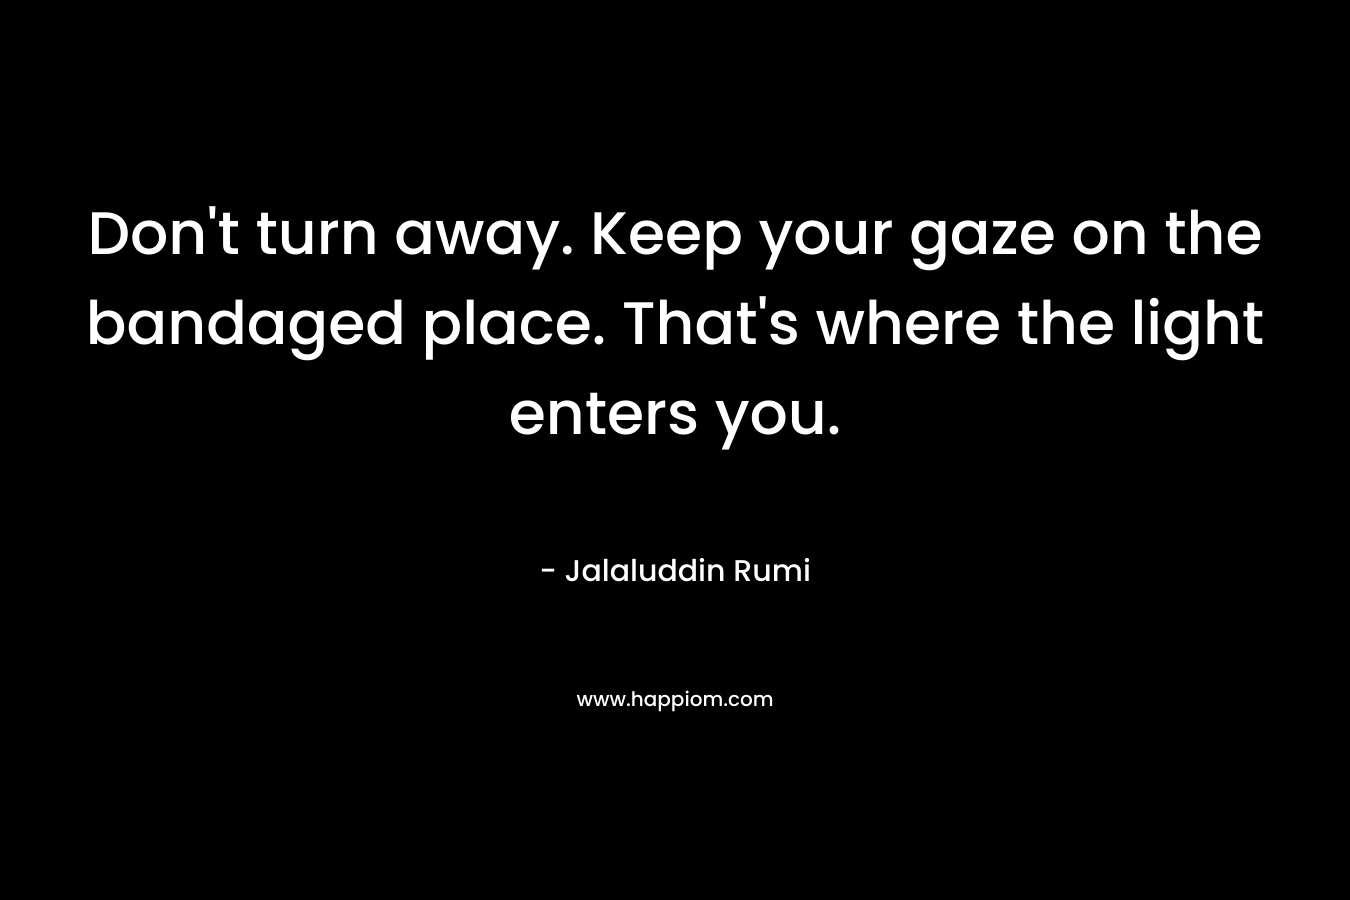 Don’t turn away. Keep your gaze on the bandaged place. That’s where the light enters you. – Jalaluddin Rumi